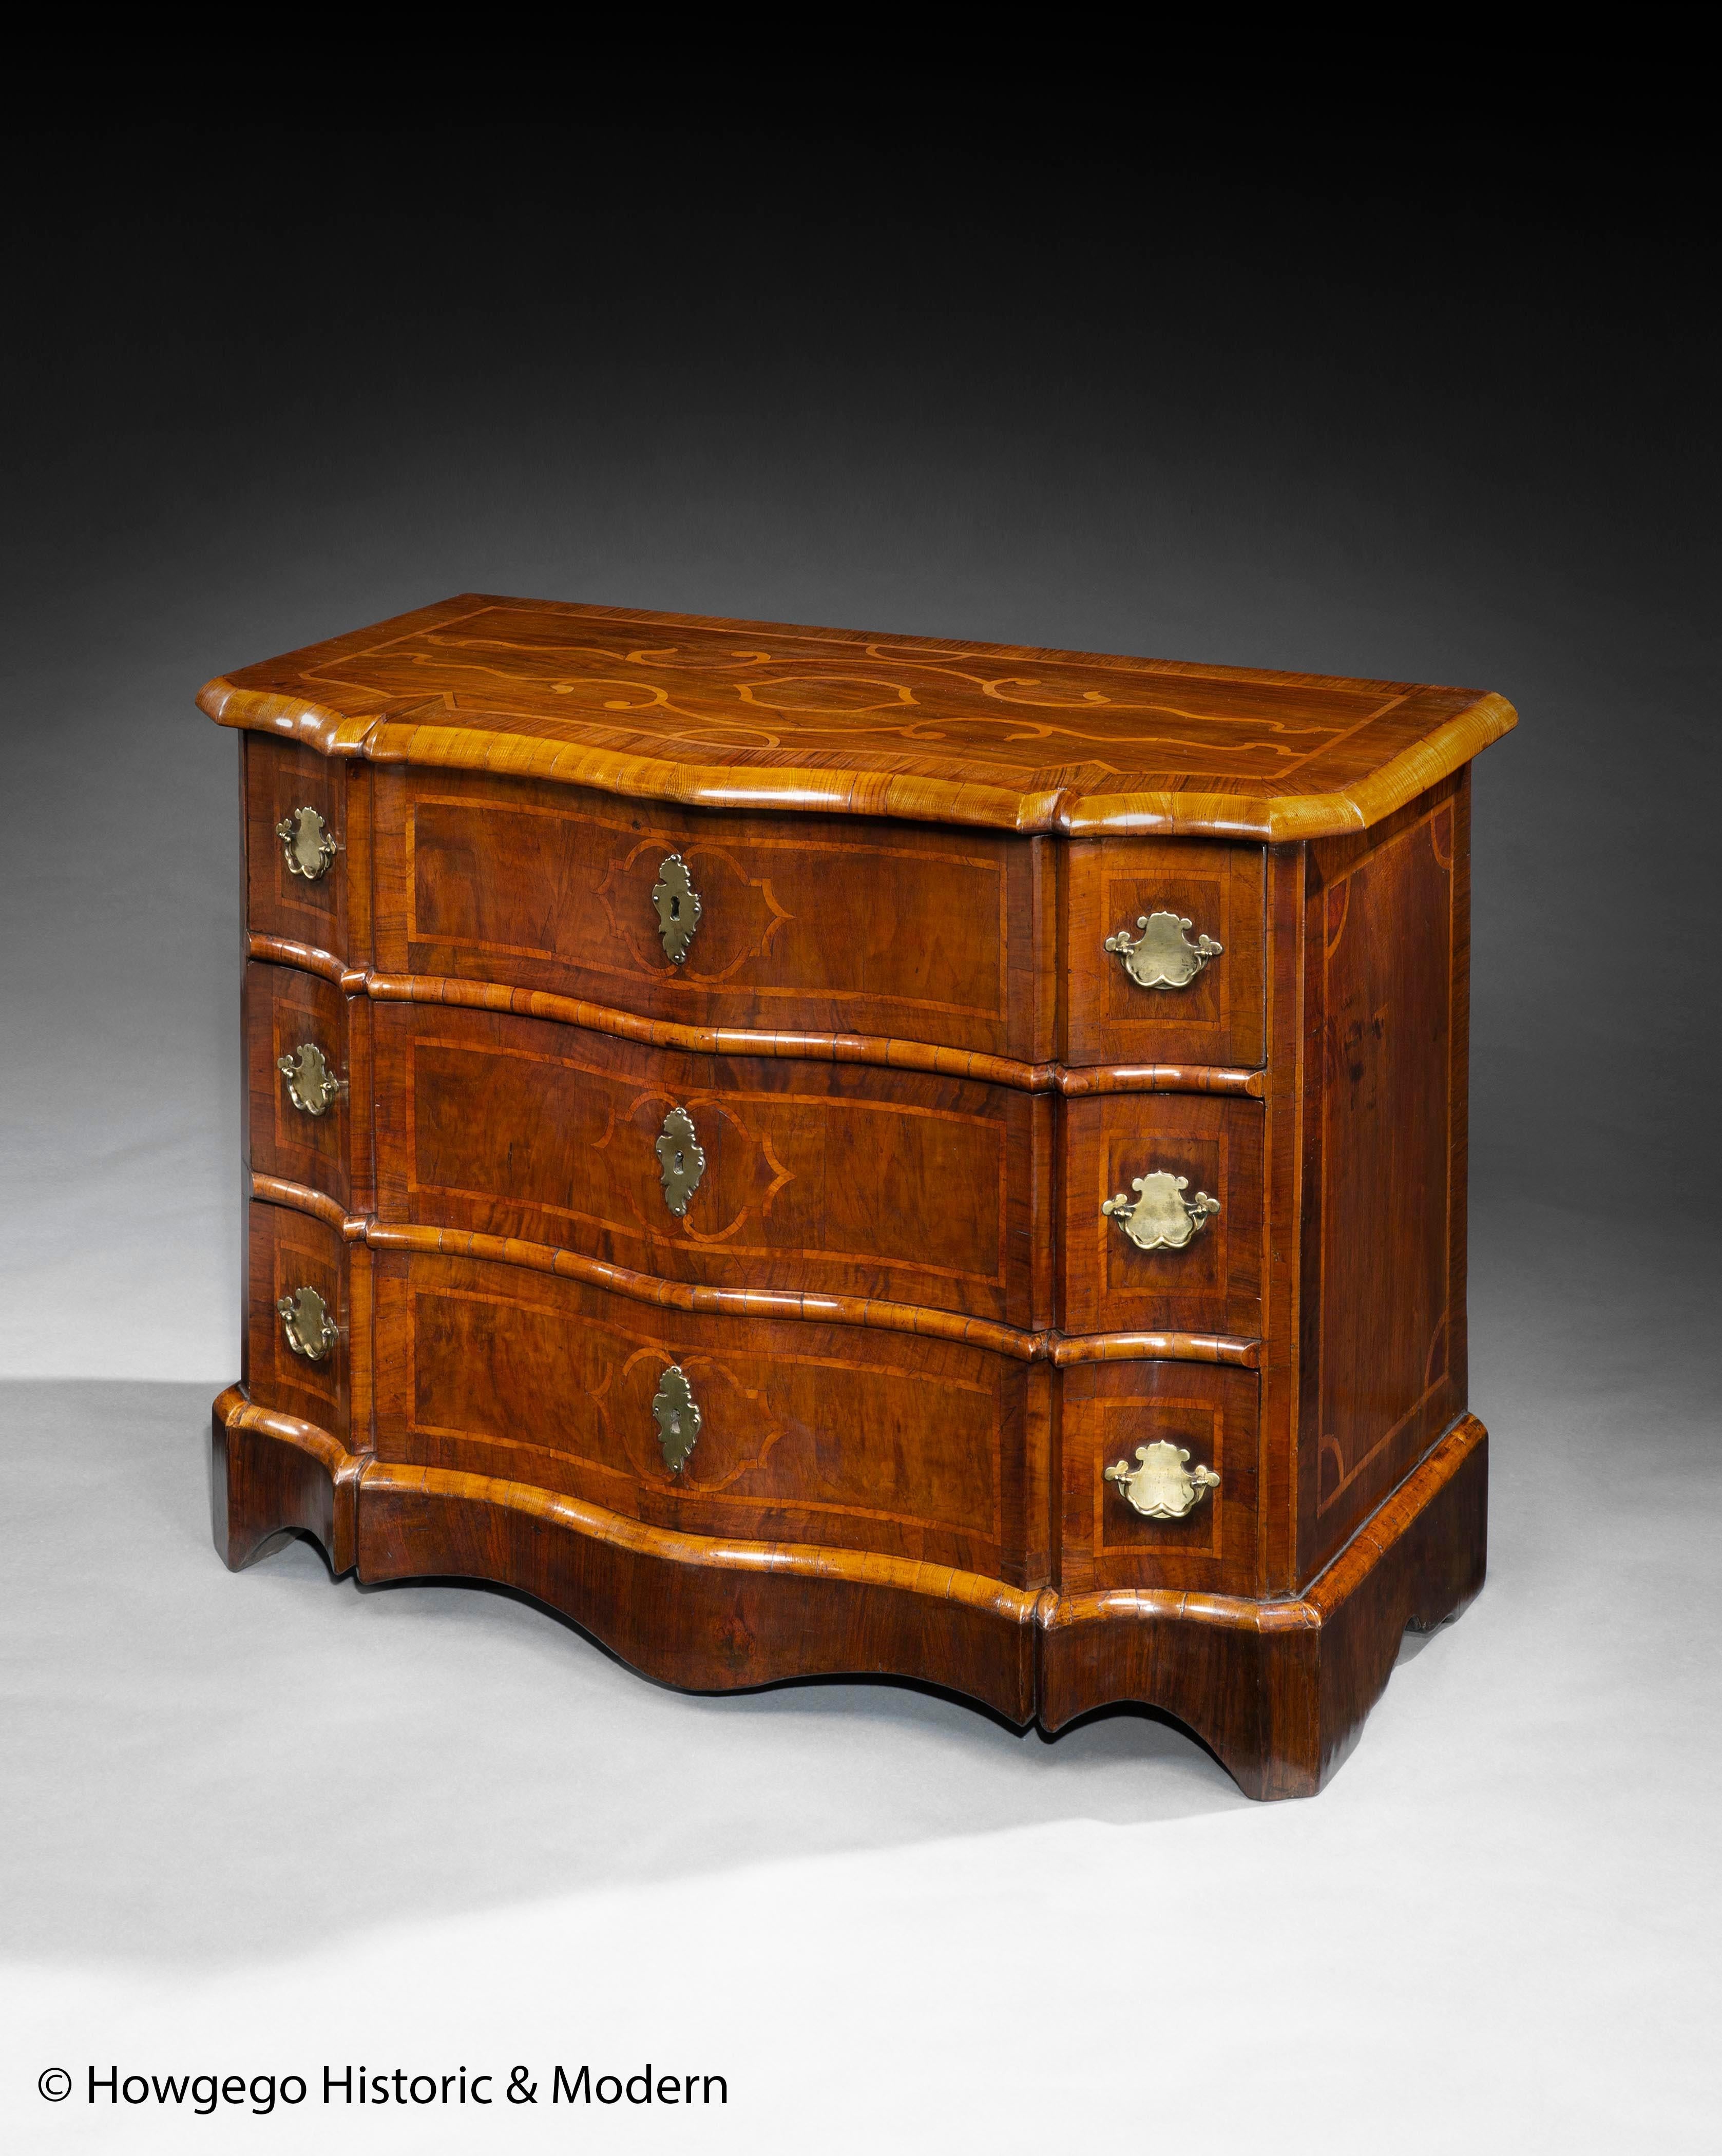 The serpentine front on this magnificent commode is sophisticated and gives it gravitas. The undulating form is a masterpiece of carpentry.
The carpenter has used different woods figuring to create a balanced mix of patterning; rosewood, walnut,